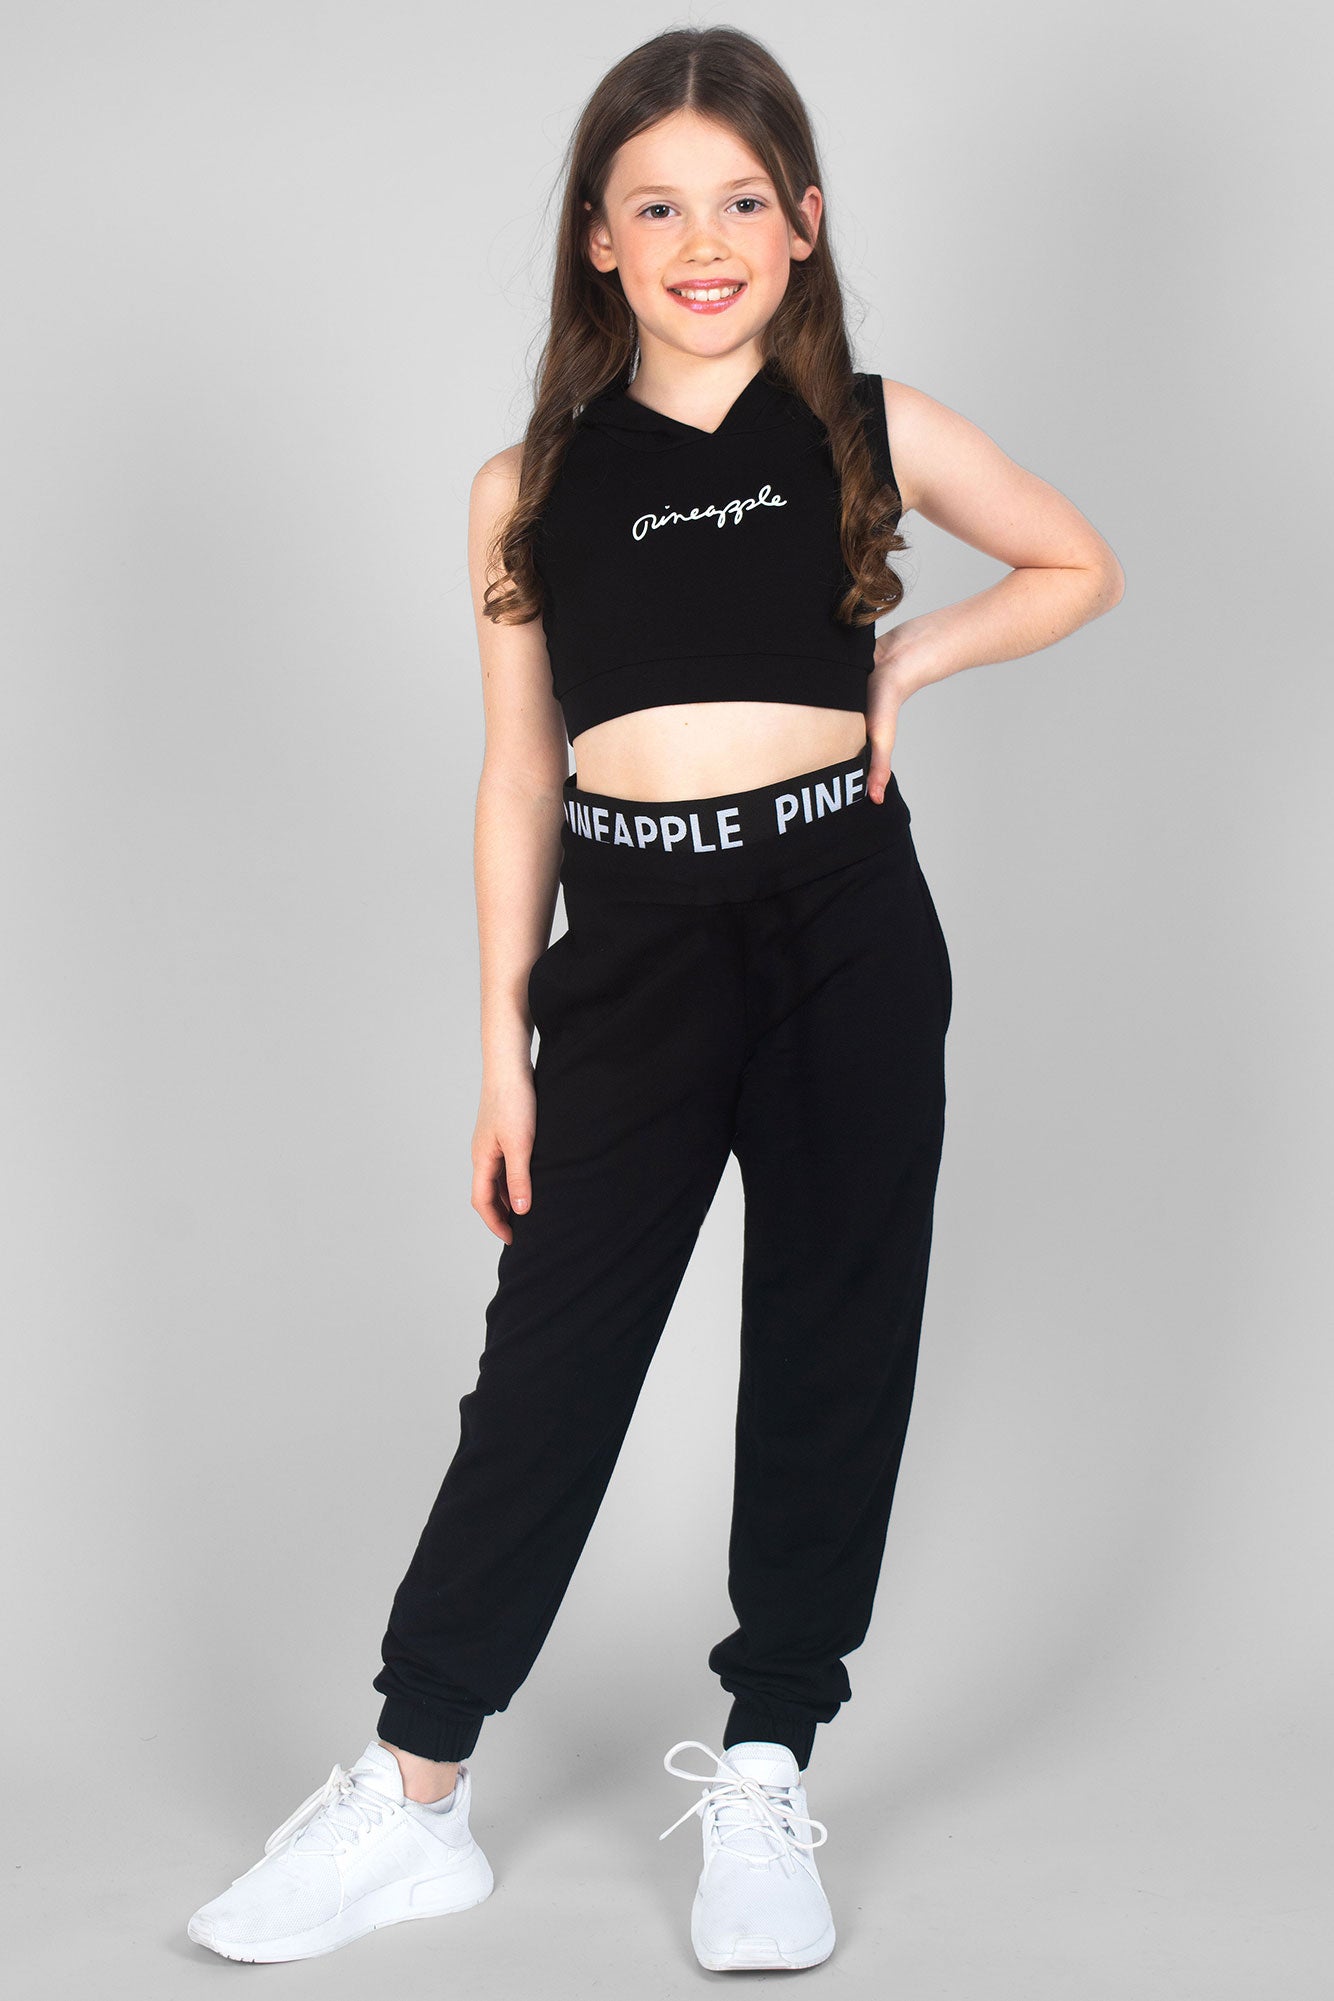 Track Pants For Girls, Girls Joggers